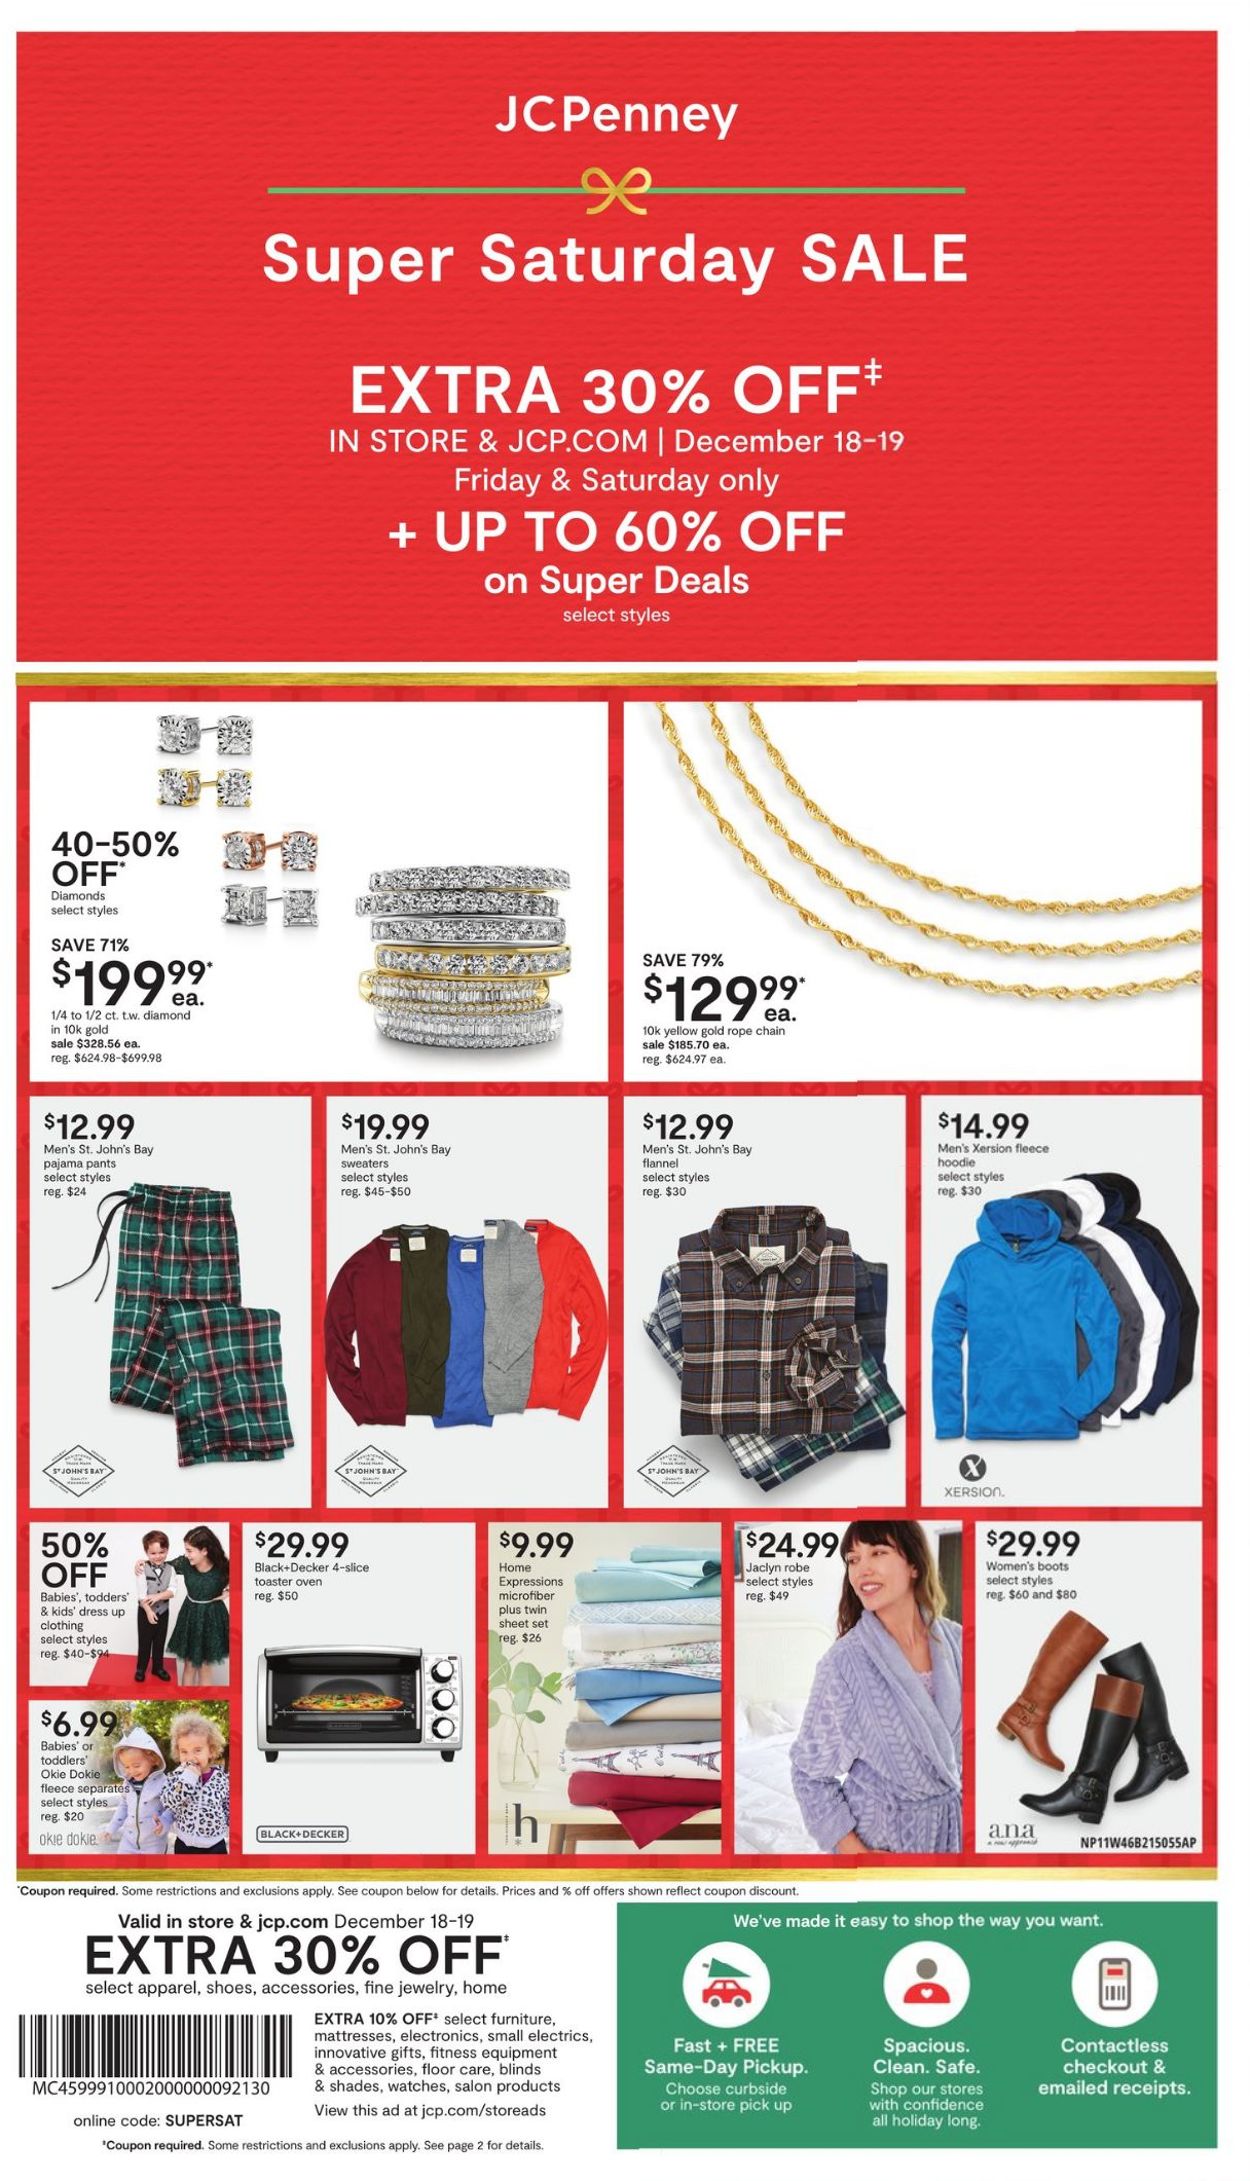 https://static.frequent-ads.com/image/item/jcpenney/51012/img001.jpg